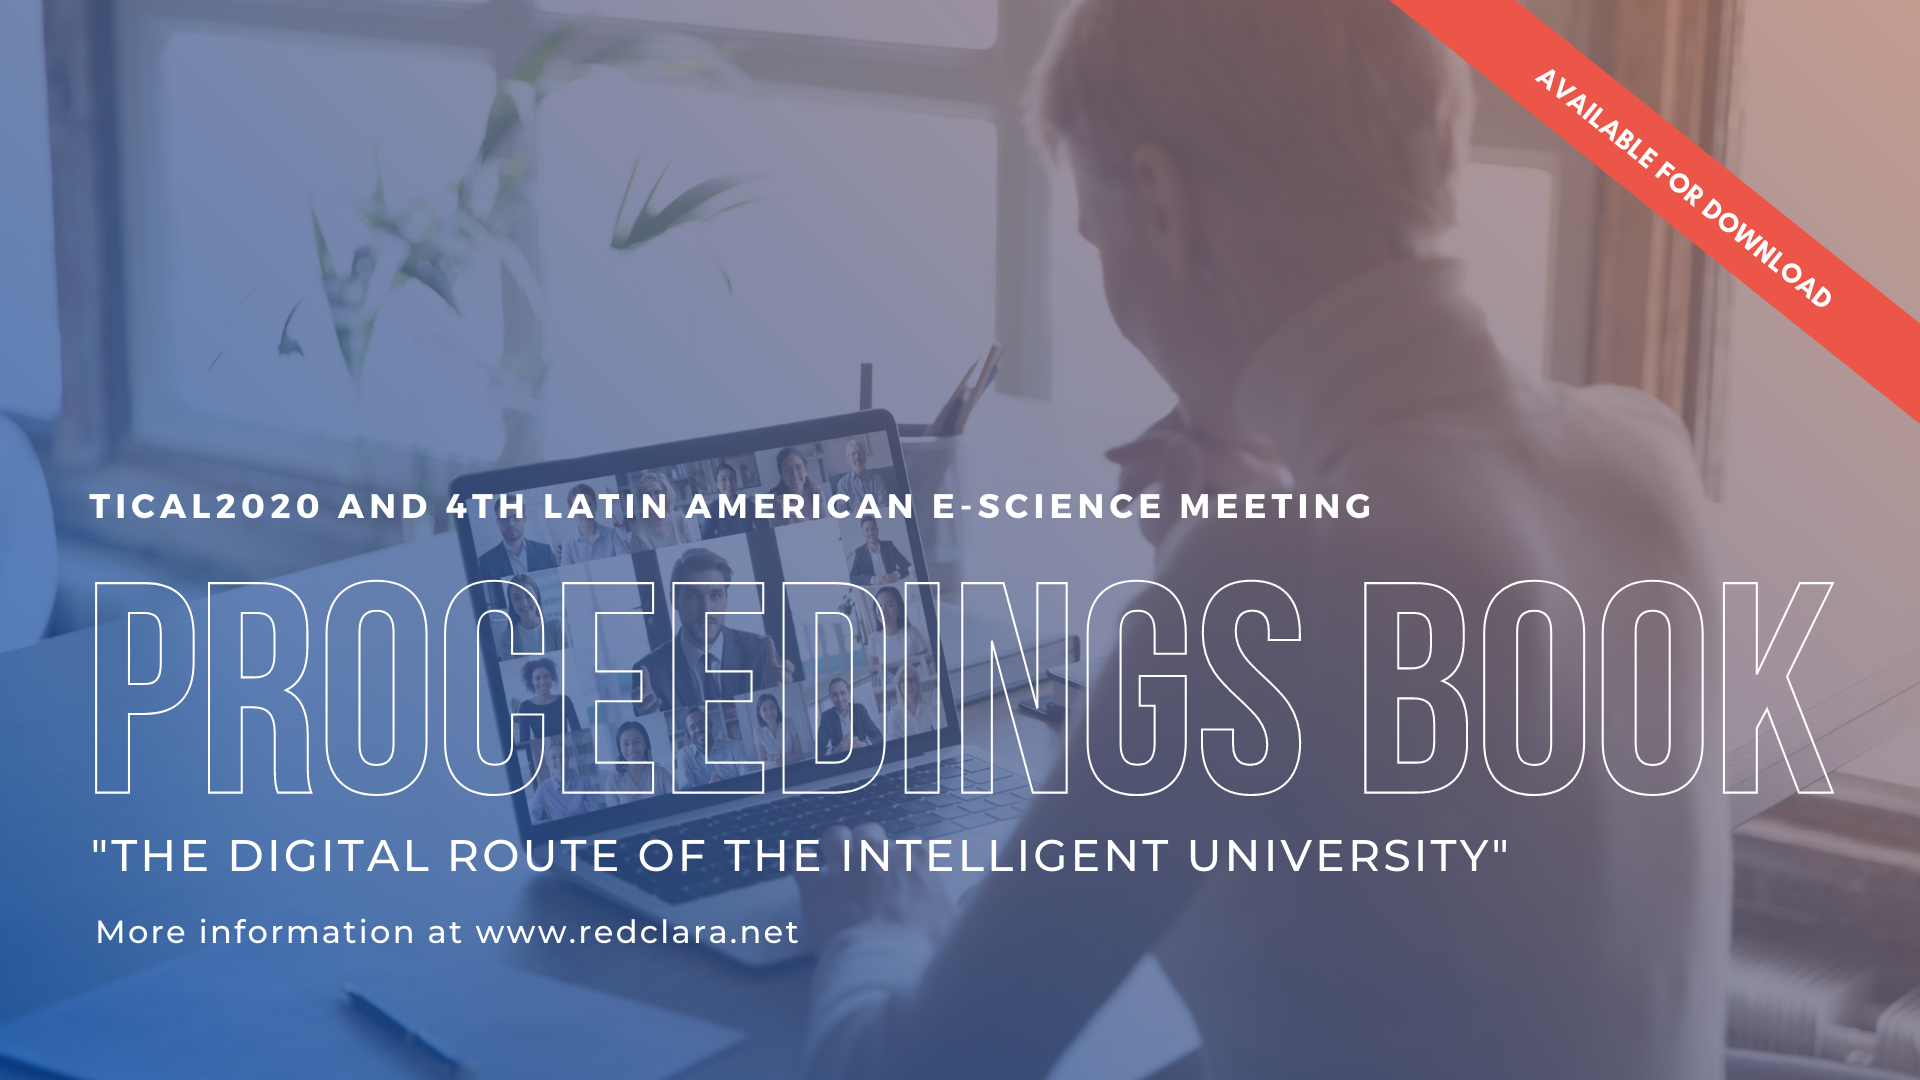 TICAL2020 and the 4th Latin American e-Science Meeting Proceedings Book is now available online for download